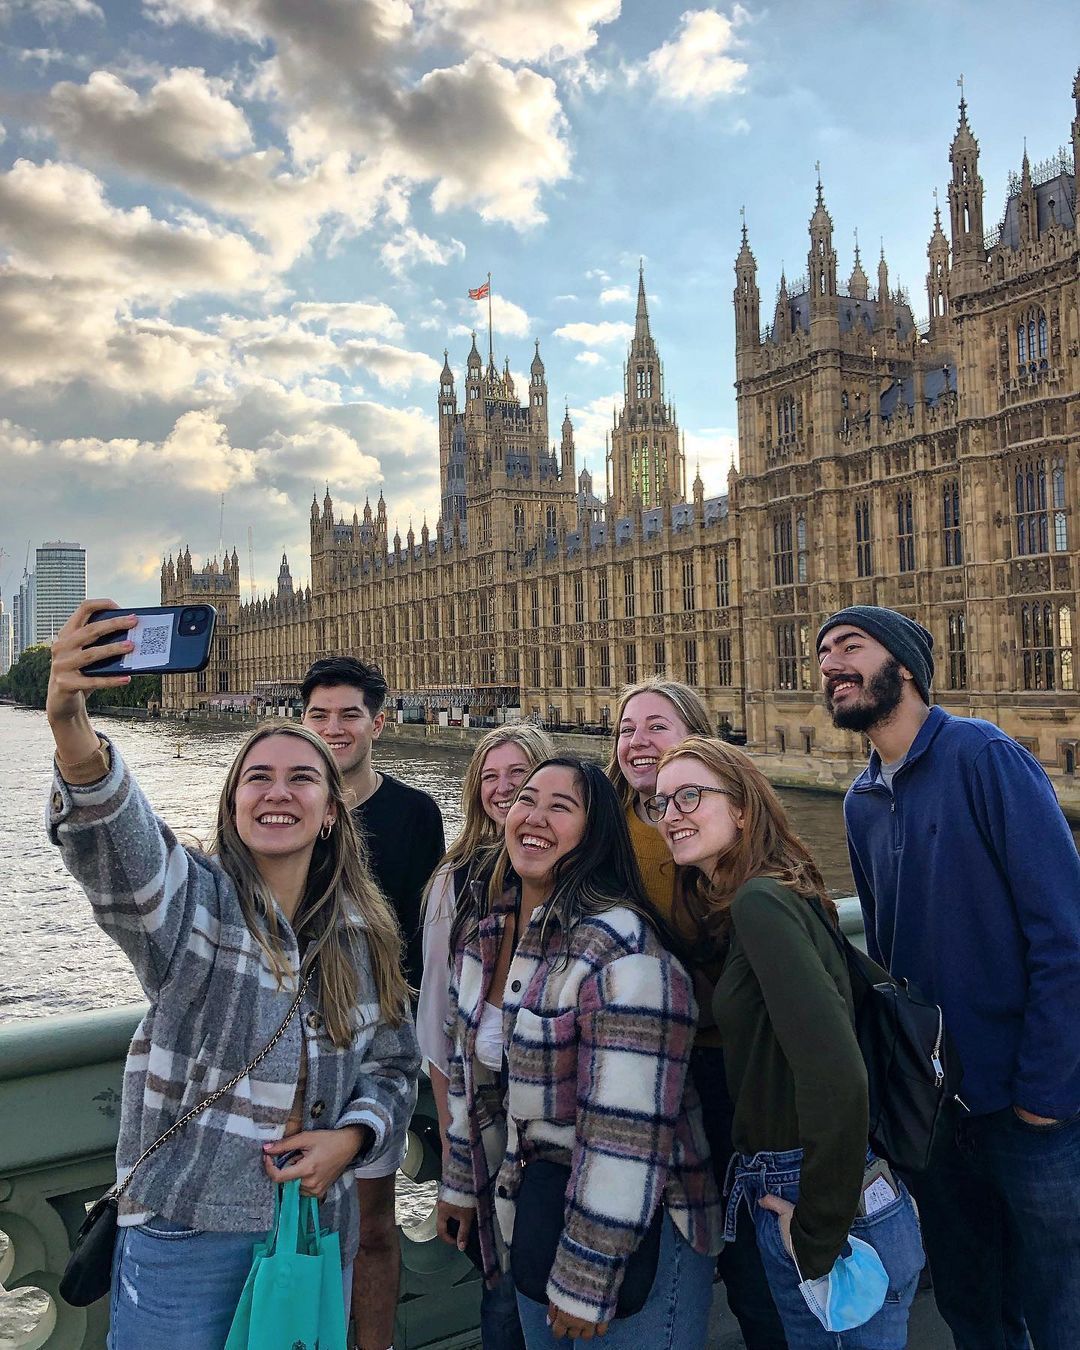 A group of people taking a selfie in front of the Palace of Westminster in London, England.